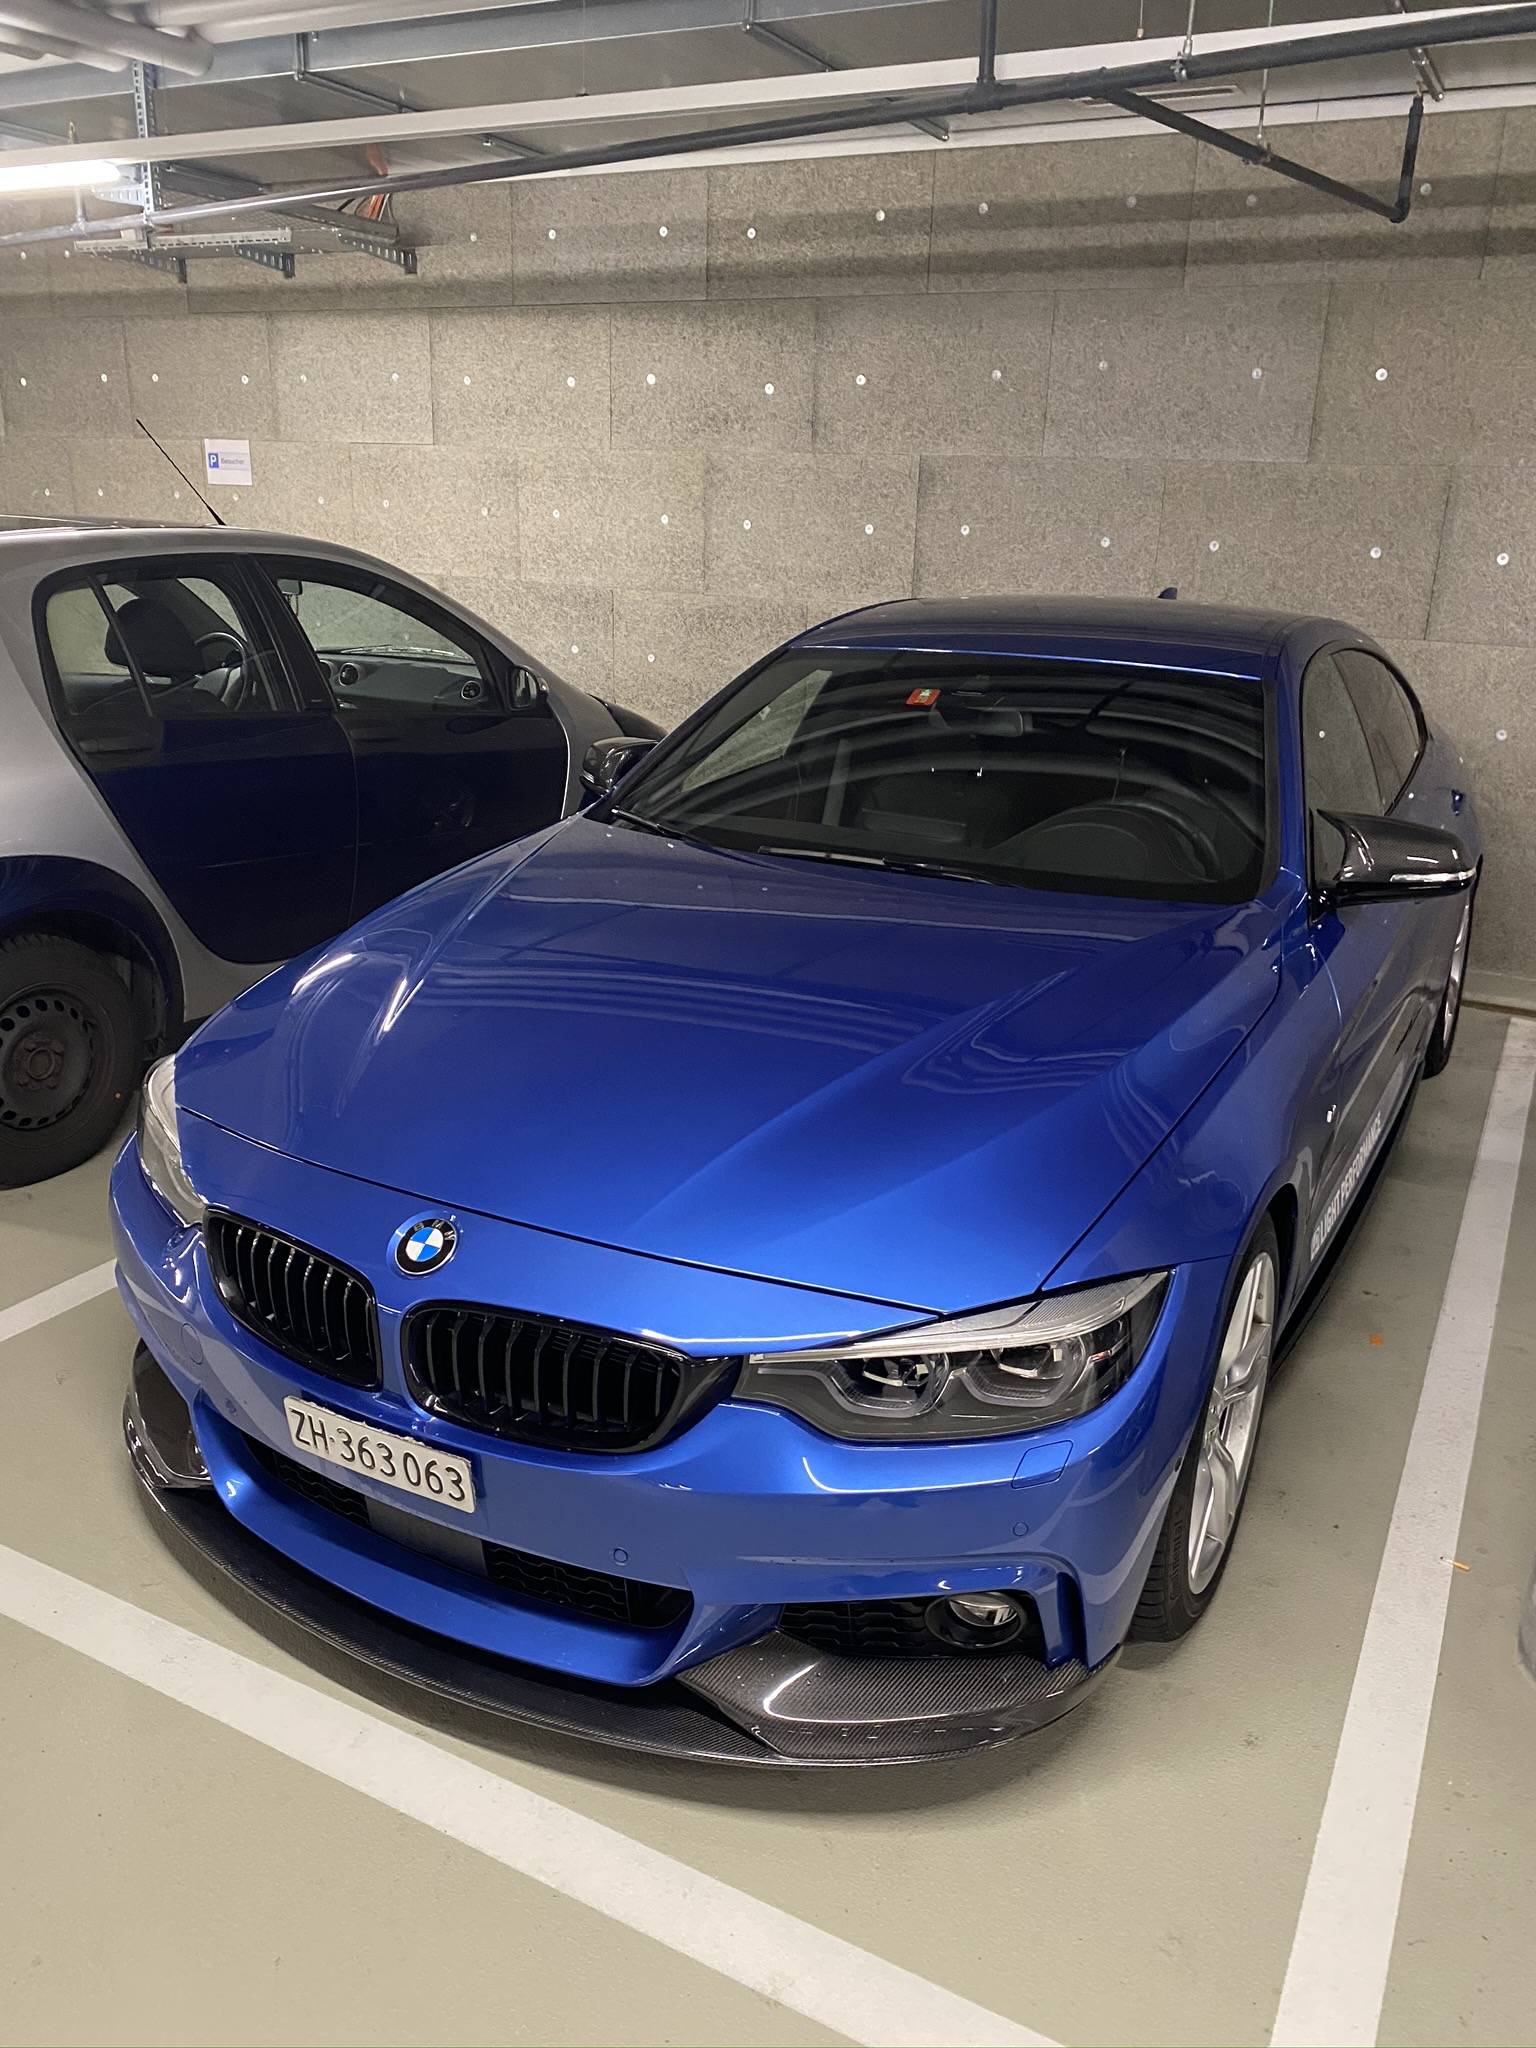 BMW 4ER SERIES P-STYLE FRONTLIPPE F32 / F33 / F36